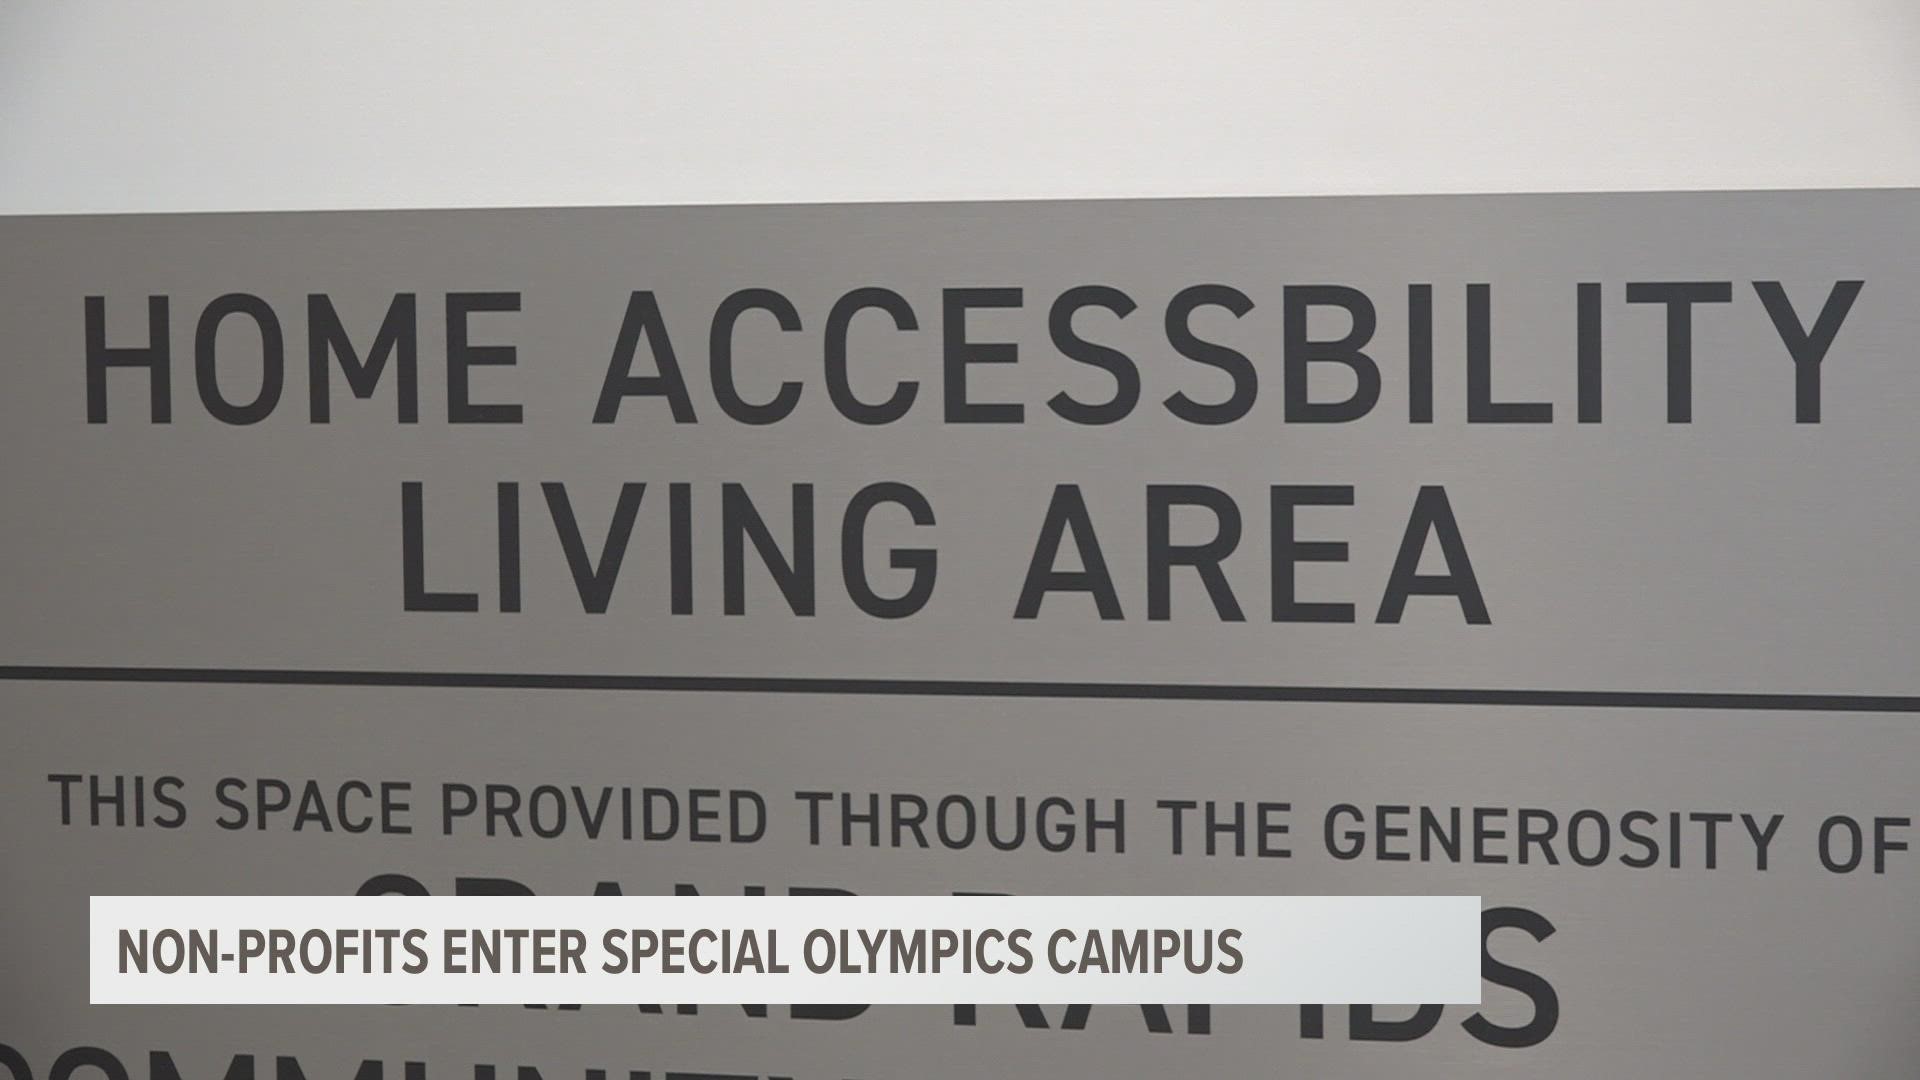 Disability Advocates officially joined Thresholds as the two newest tenants at the Special Olympics Campus in Kent County.